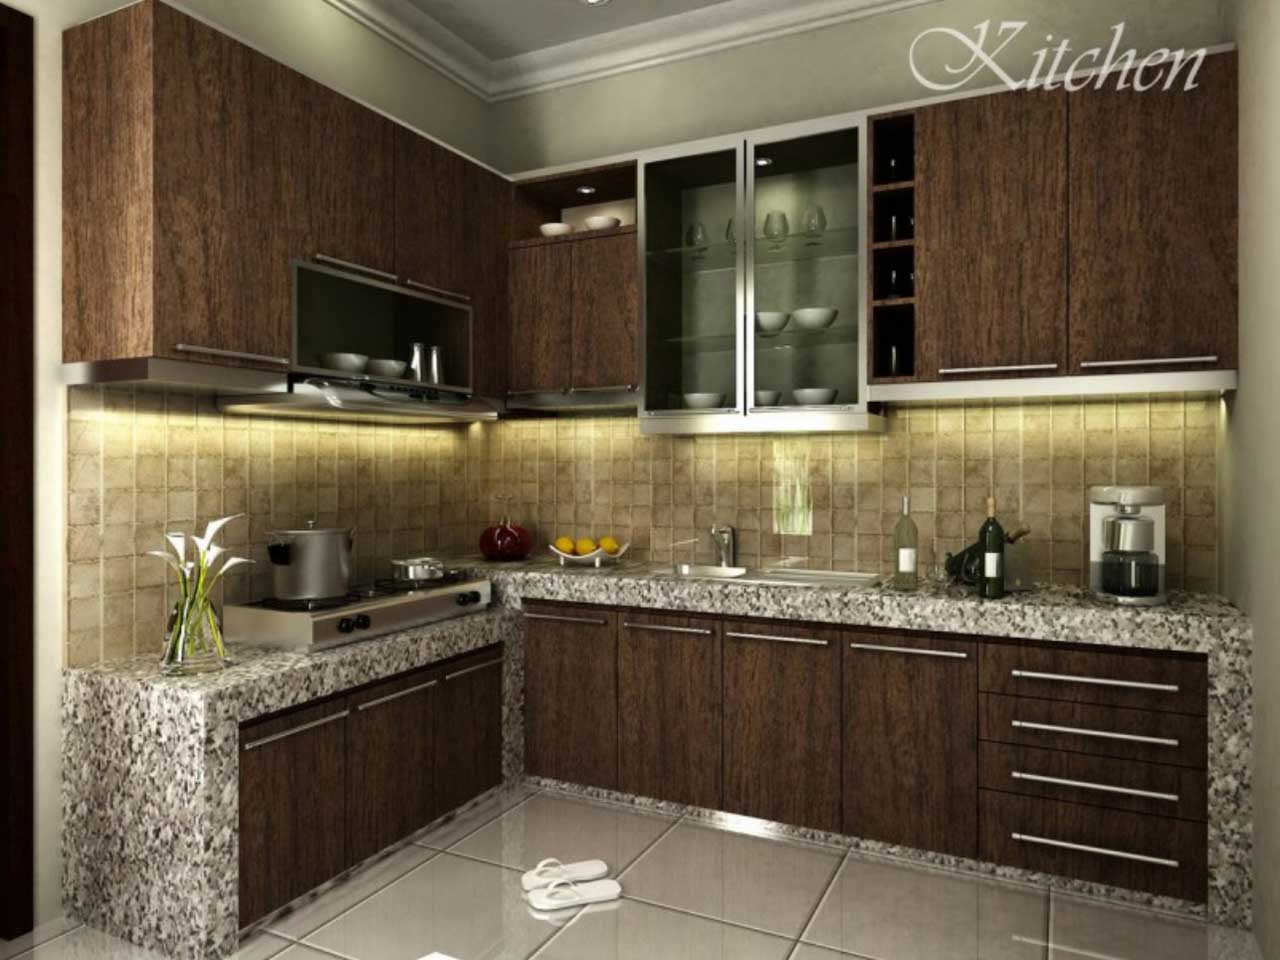 Kitchen Remodel Small Awesome Kitchen Remodel Ideas For Small House Design With Traditional L Shaped Wooden Cabinets Idea And Interesting Gray Granite Countertop Design Also Beige Tiles Backsplash Decorating Idea Kitchen Most Popular Kitchen Layout To Emulate Your Own After